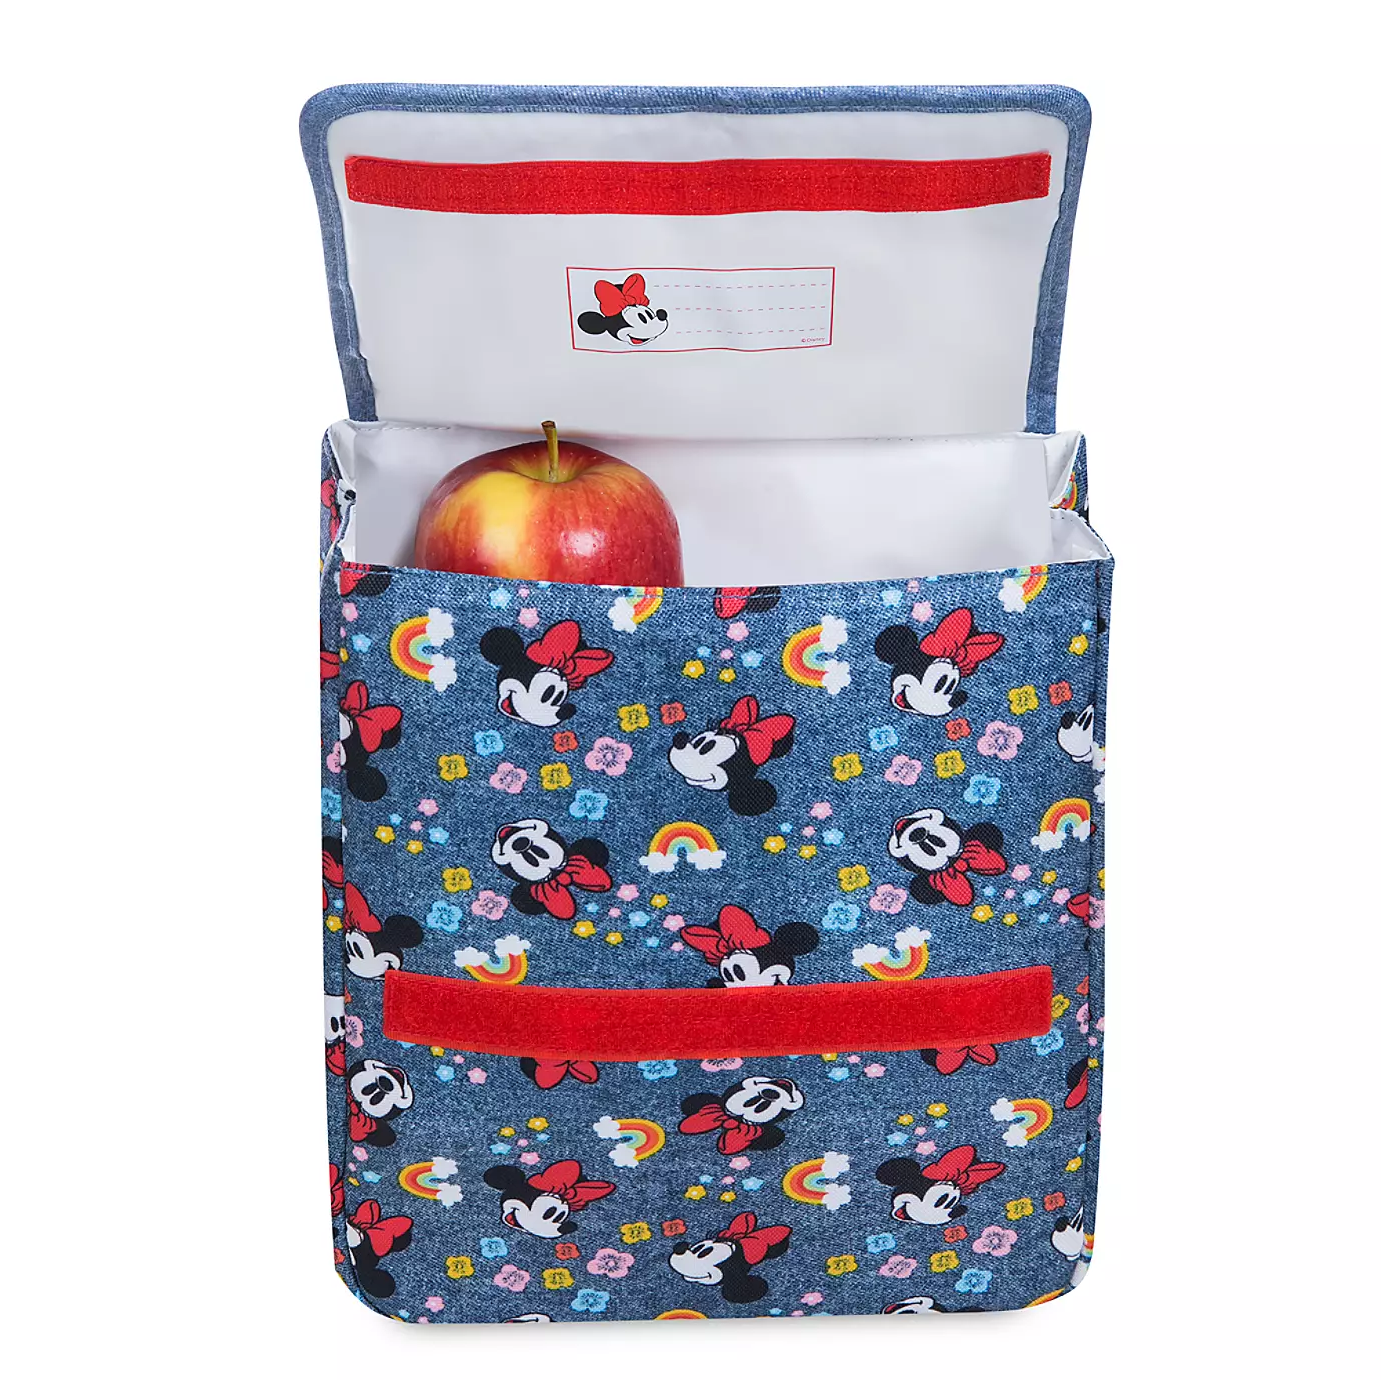 Lunch Bag - Disney - Minnie Mouse - Helllo Red, Size: One Size